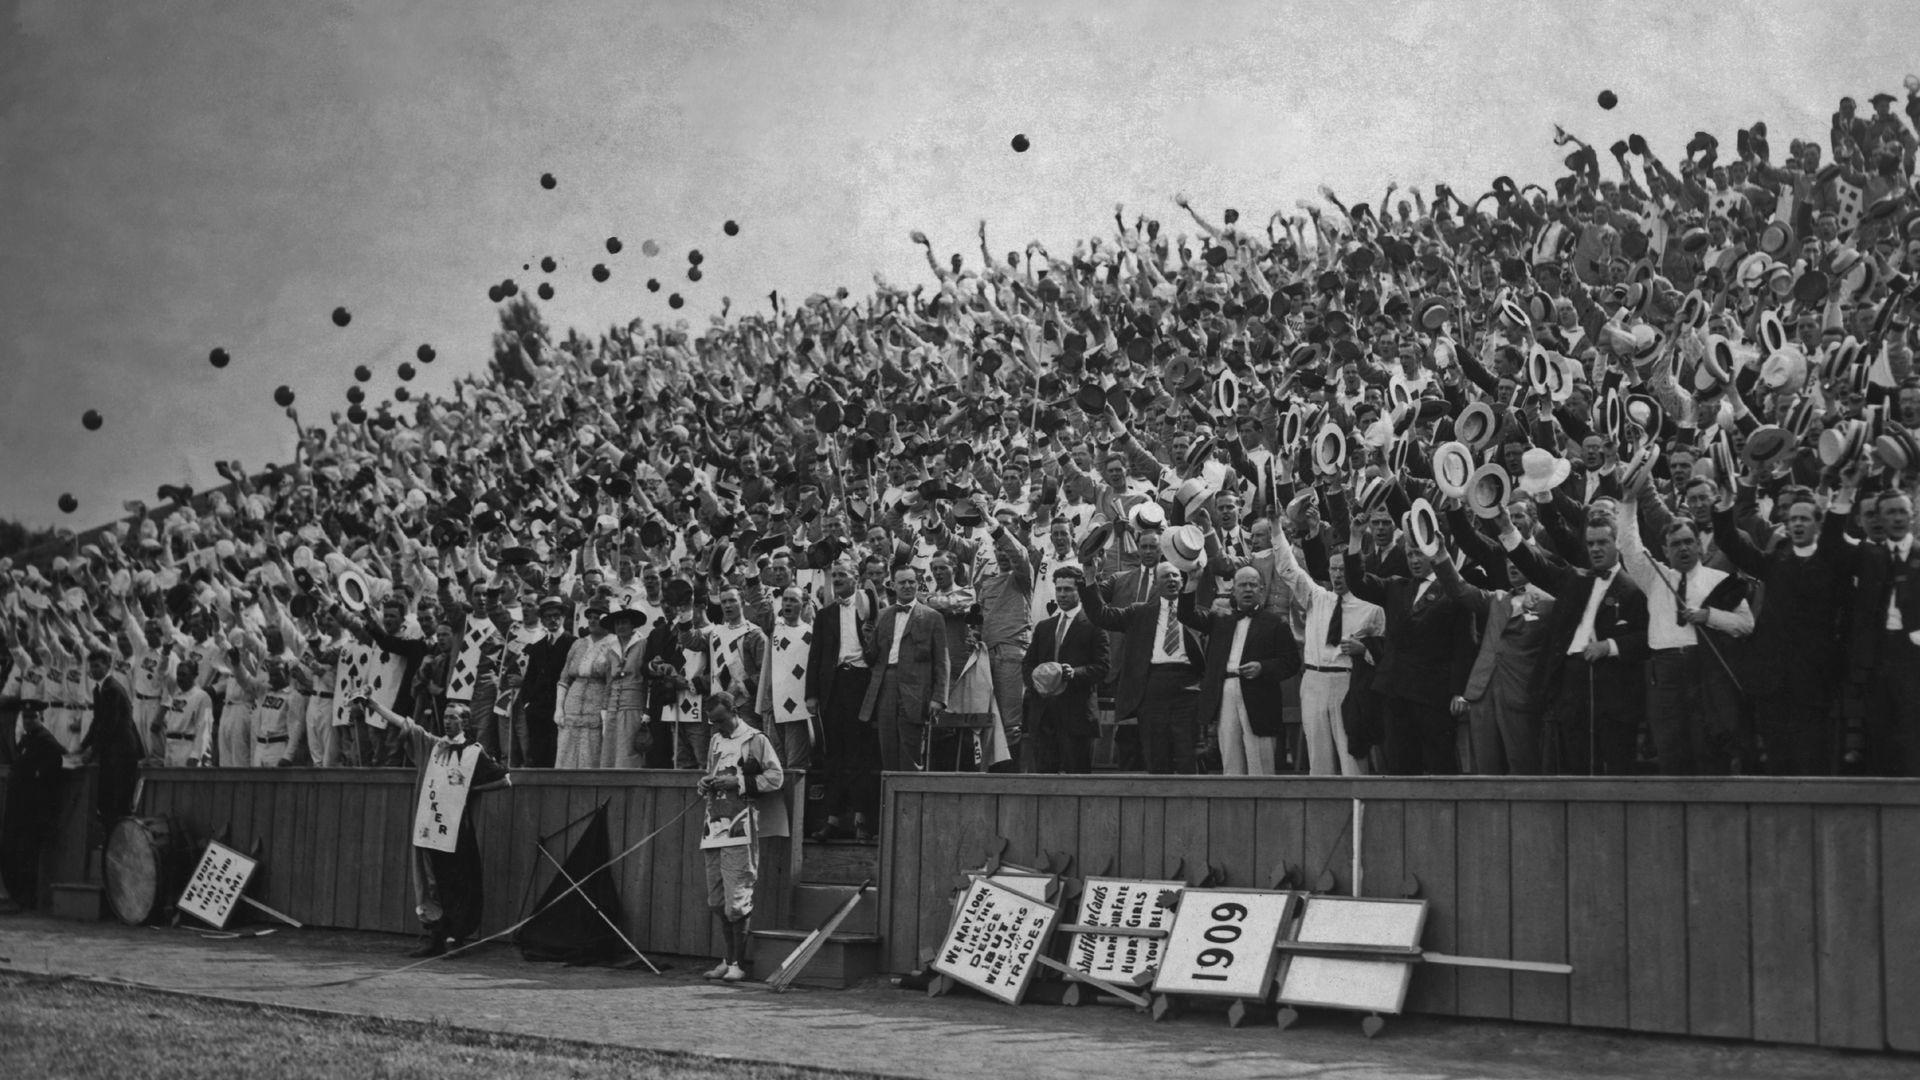 A black and white photo of college graduates throwing caps into the air